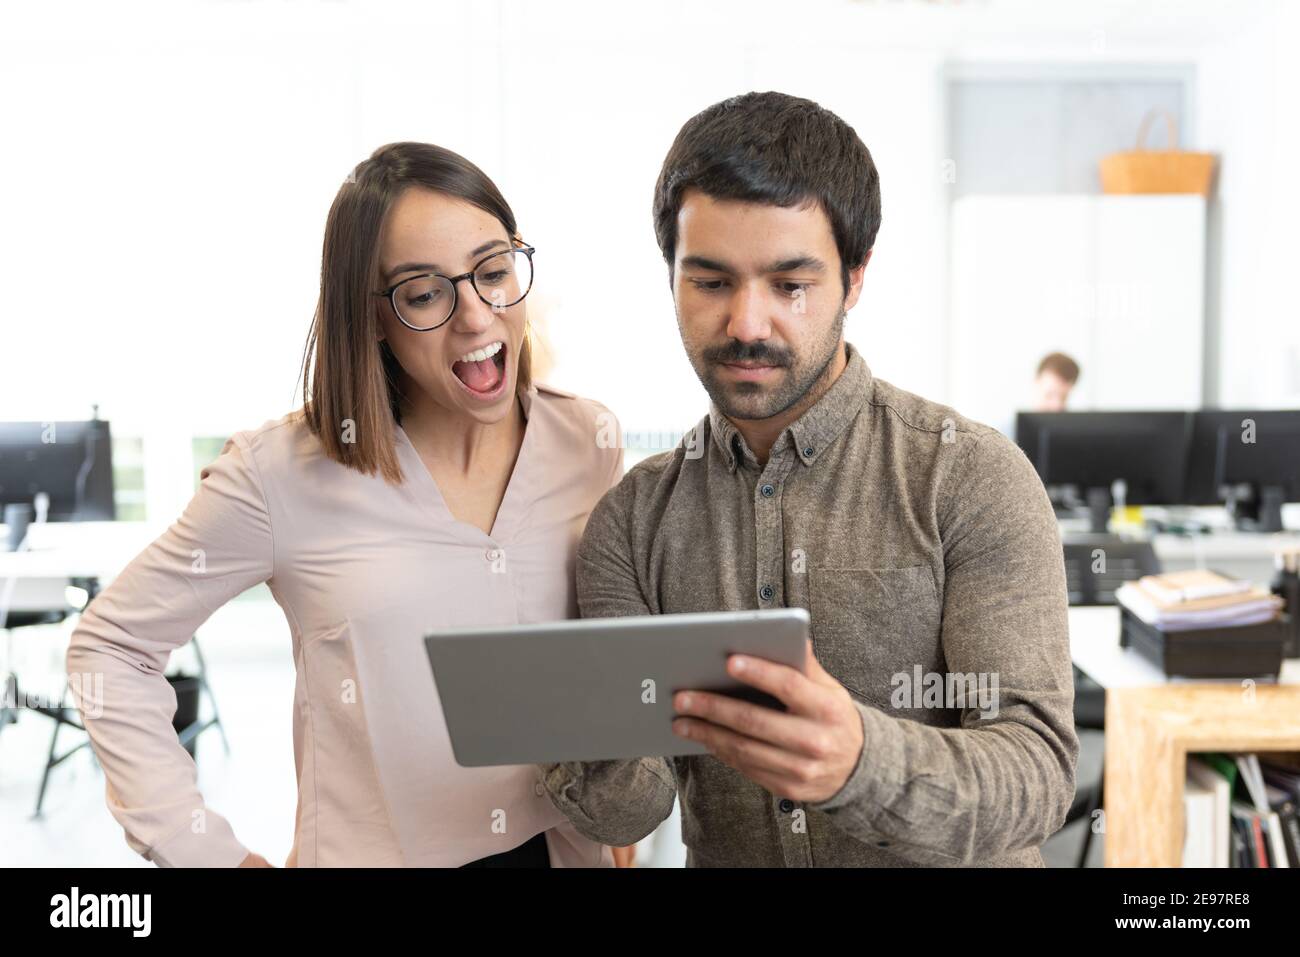 Hispanic proud man showing something to a surprised coworker on his tablet at the office. Stock Photo